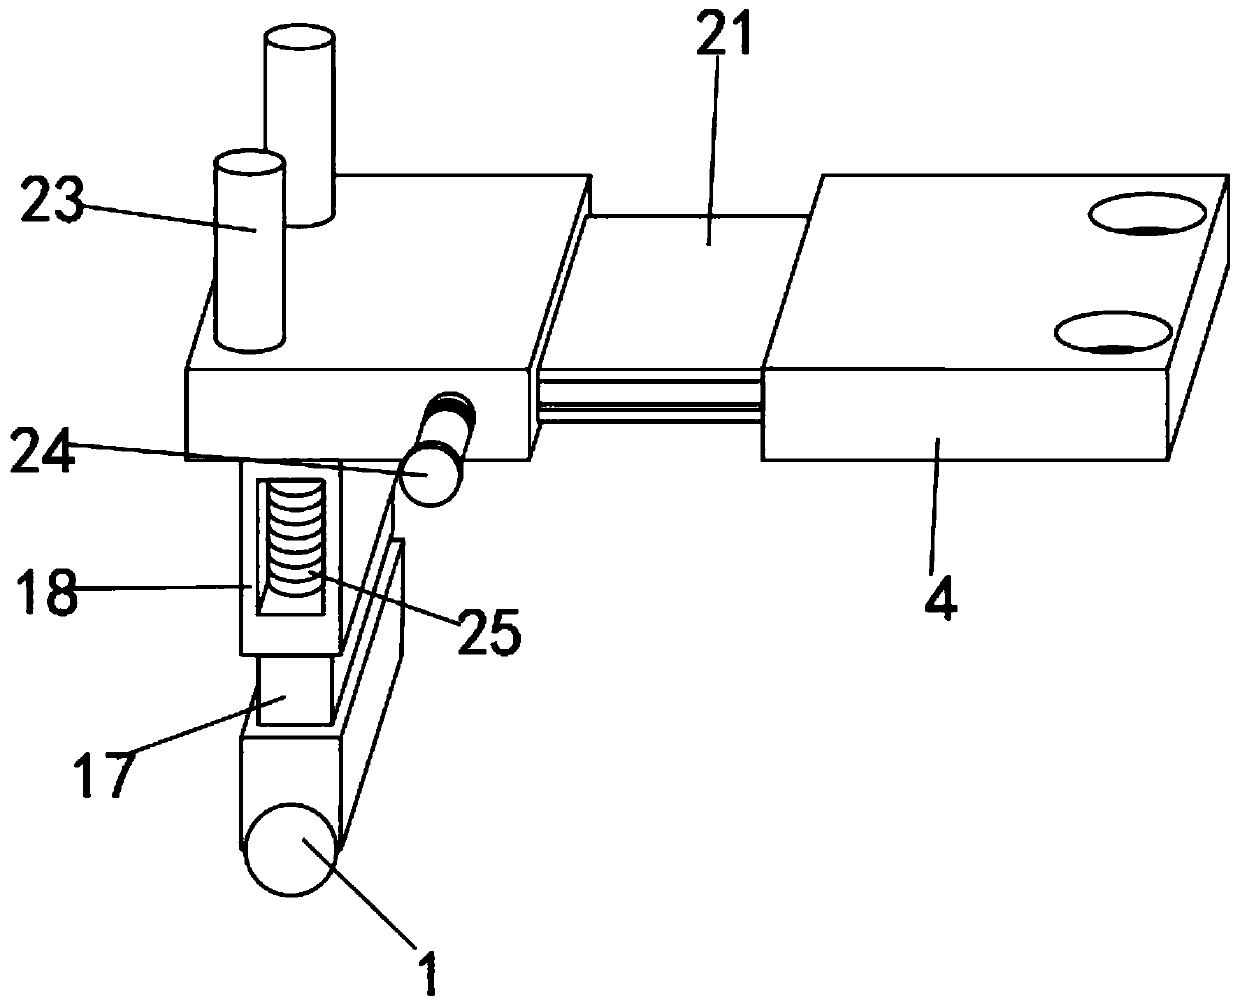 Take-up device with safety protection structure